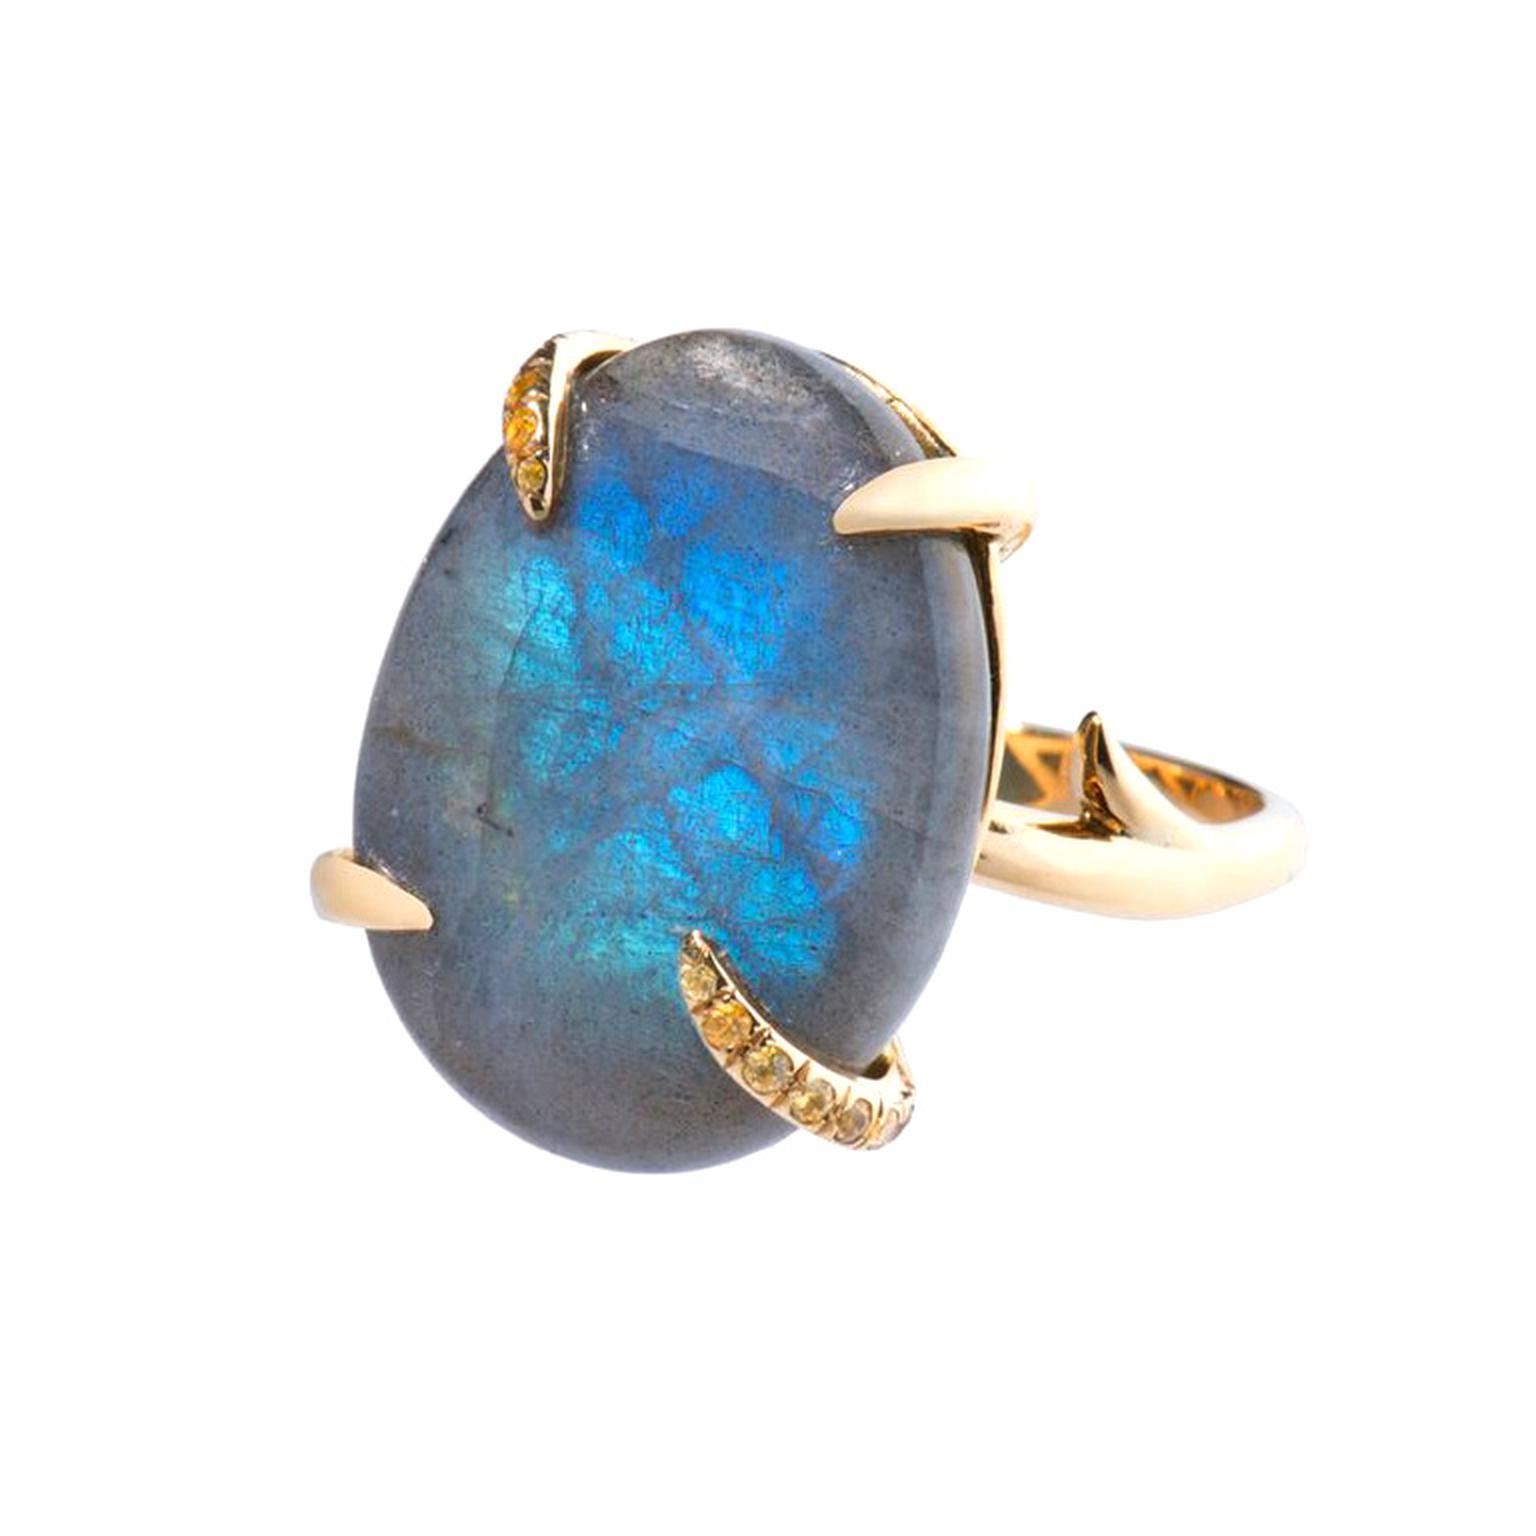 Gemstone trends: cool colours and cuts for 2016